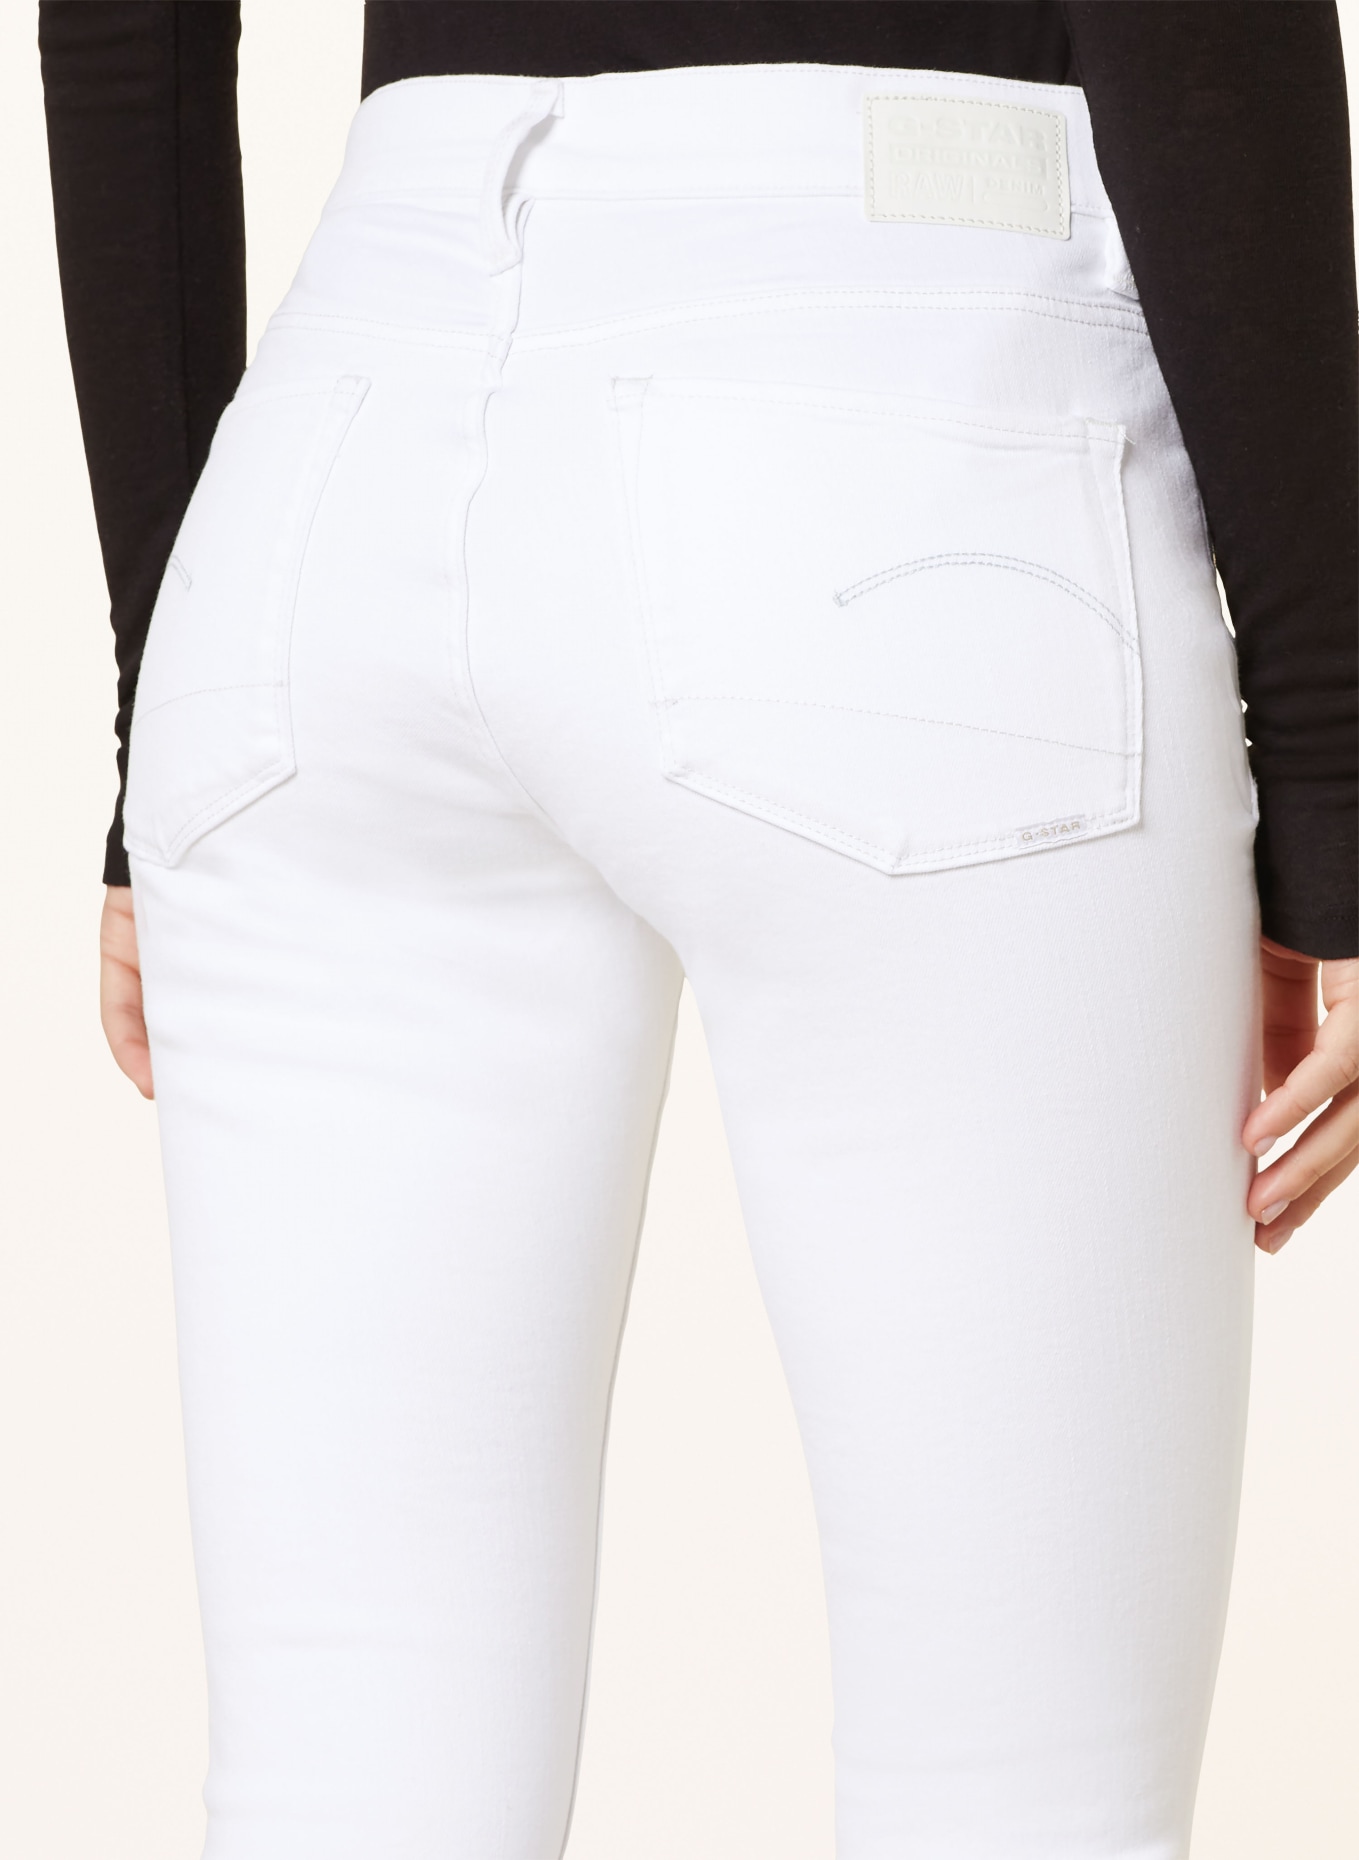 G-Star RAW Skinny jeans, Color: G547 paper white gd (Image 5)